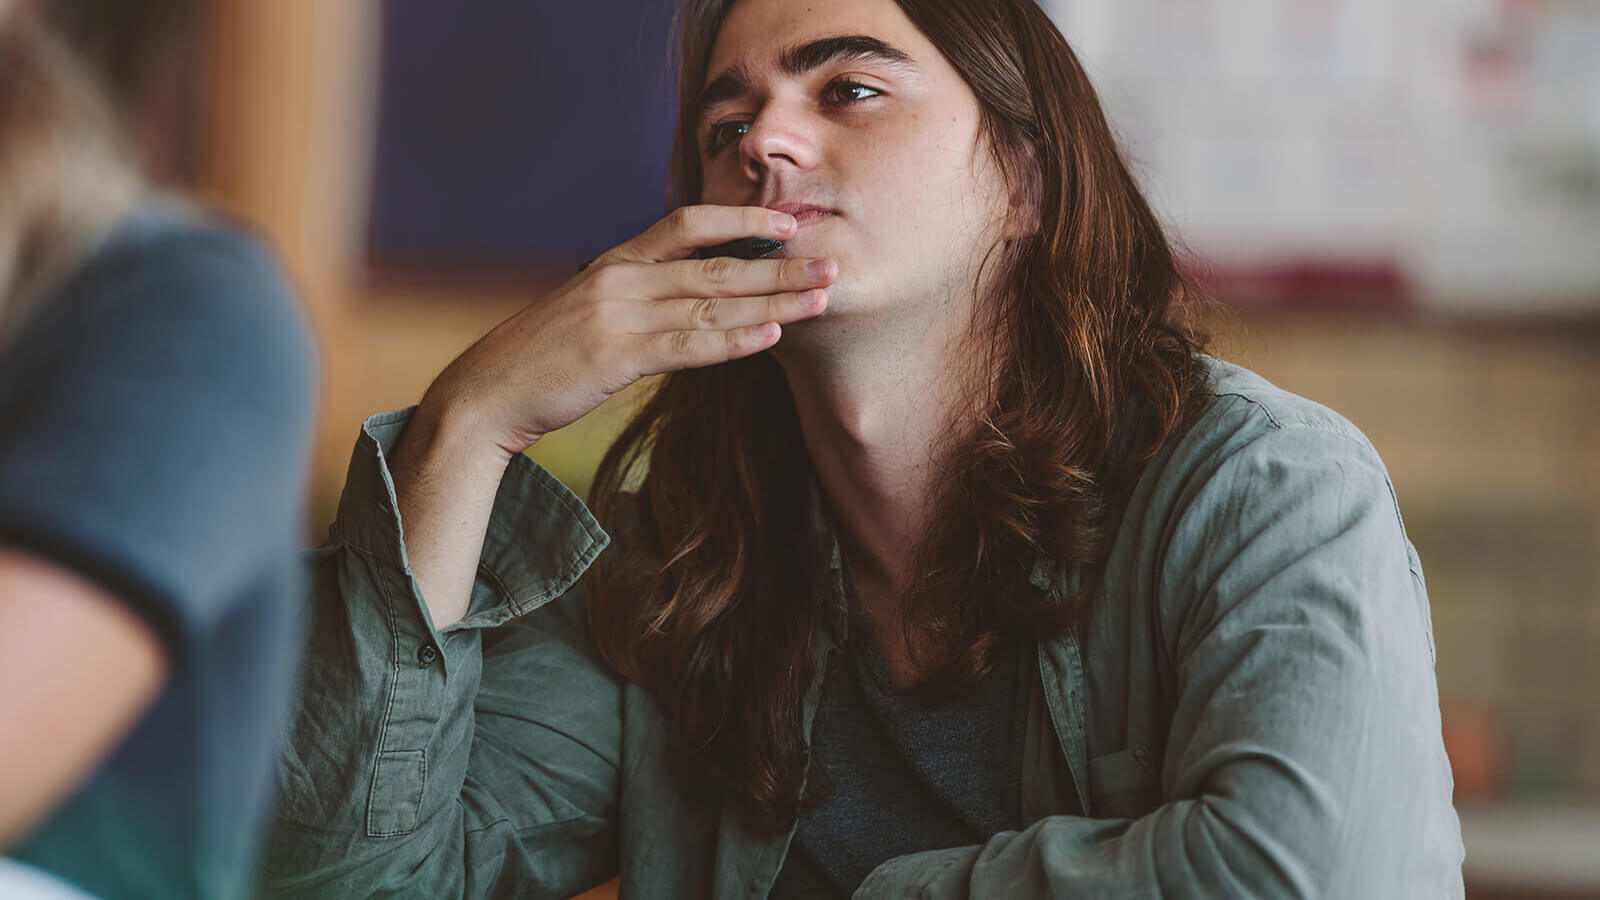 A male student holds his chin and looks off in introspection